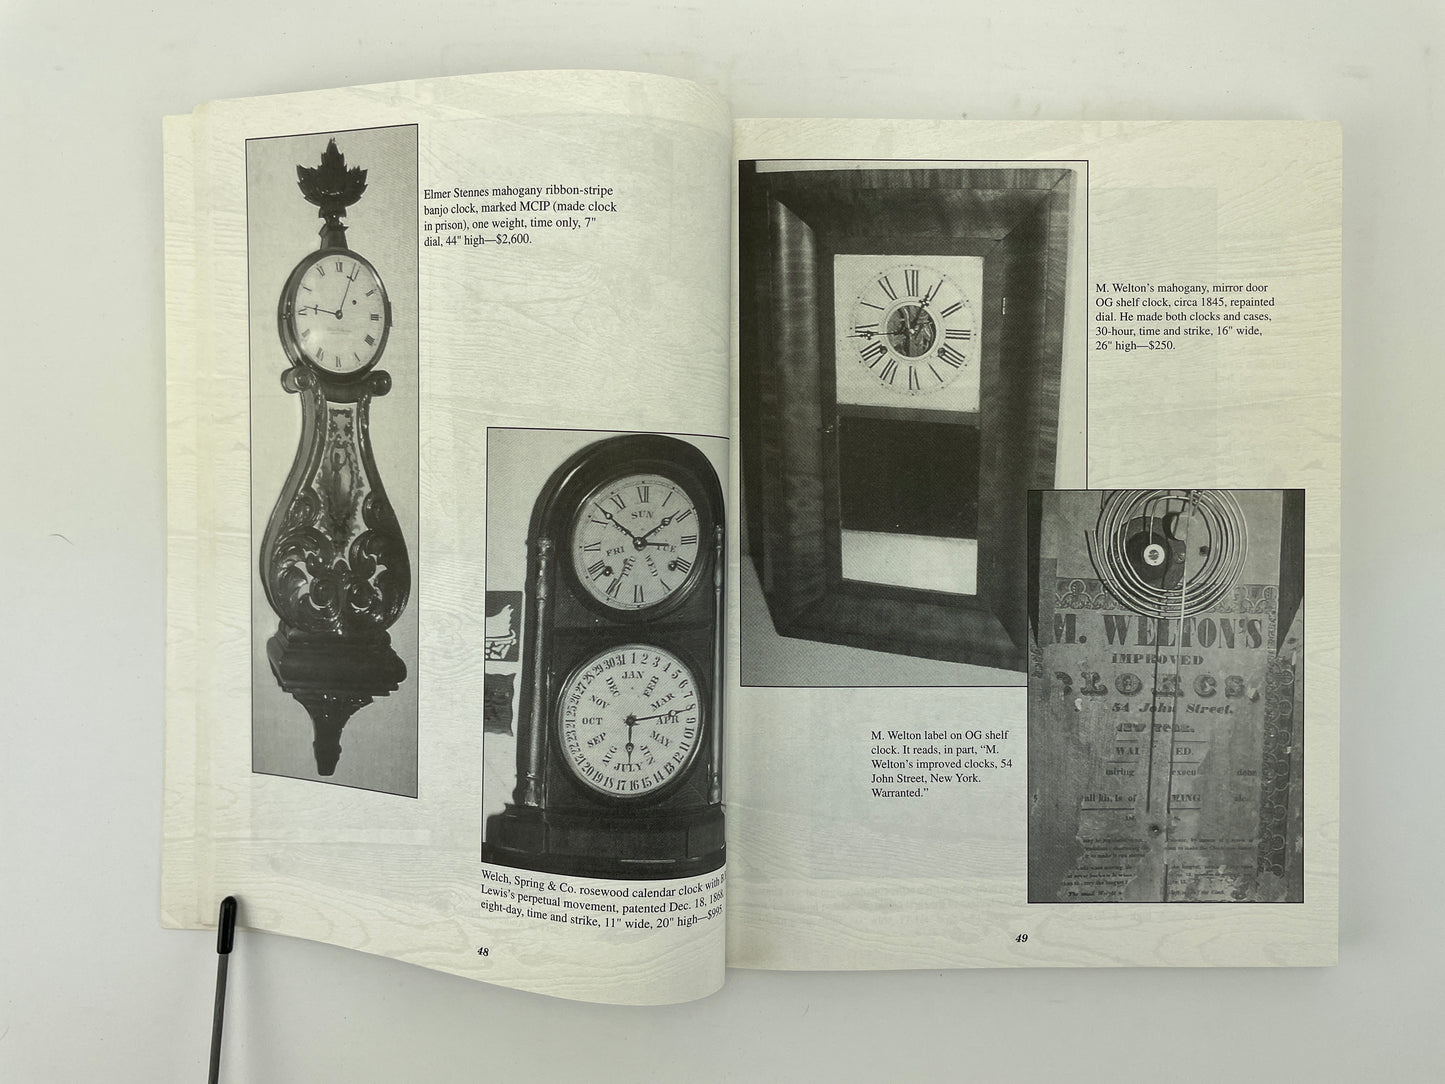 Lot 121- Price Guide to Antique Clocks by Robert and Harriett Swedberg